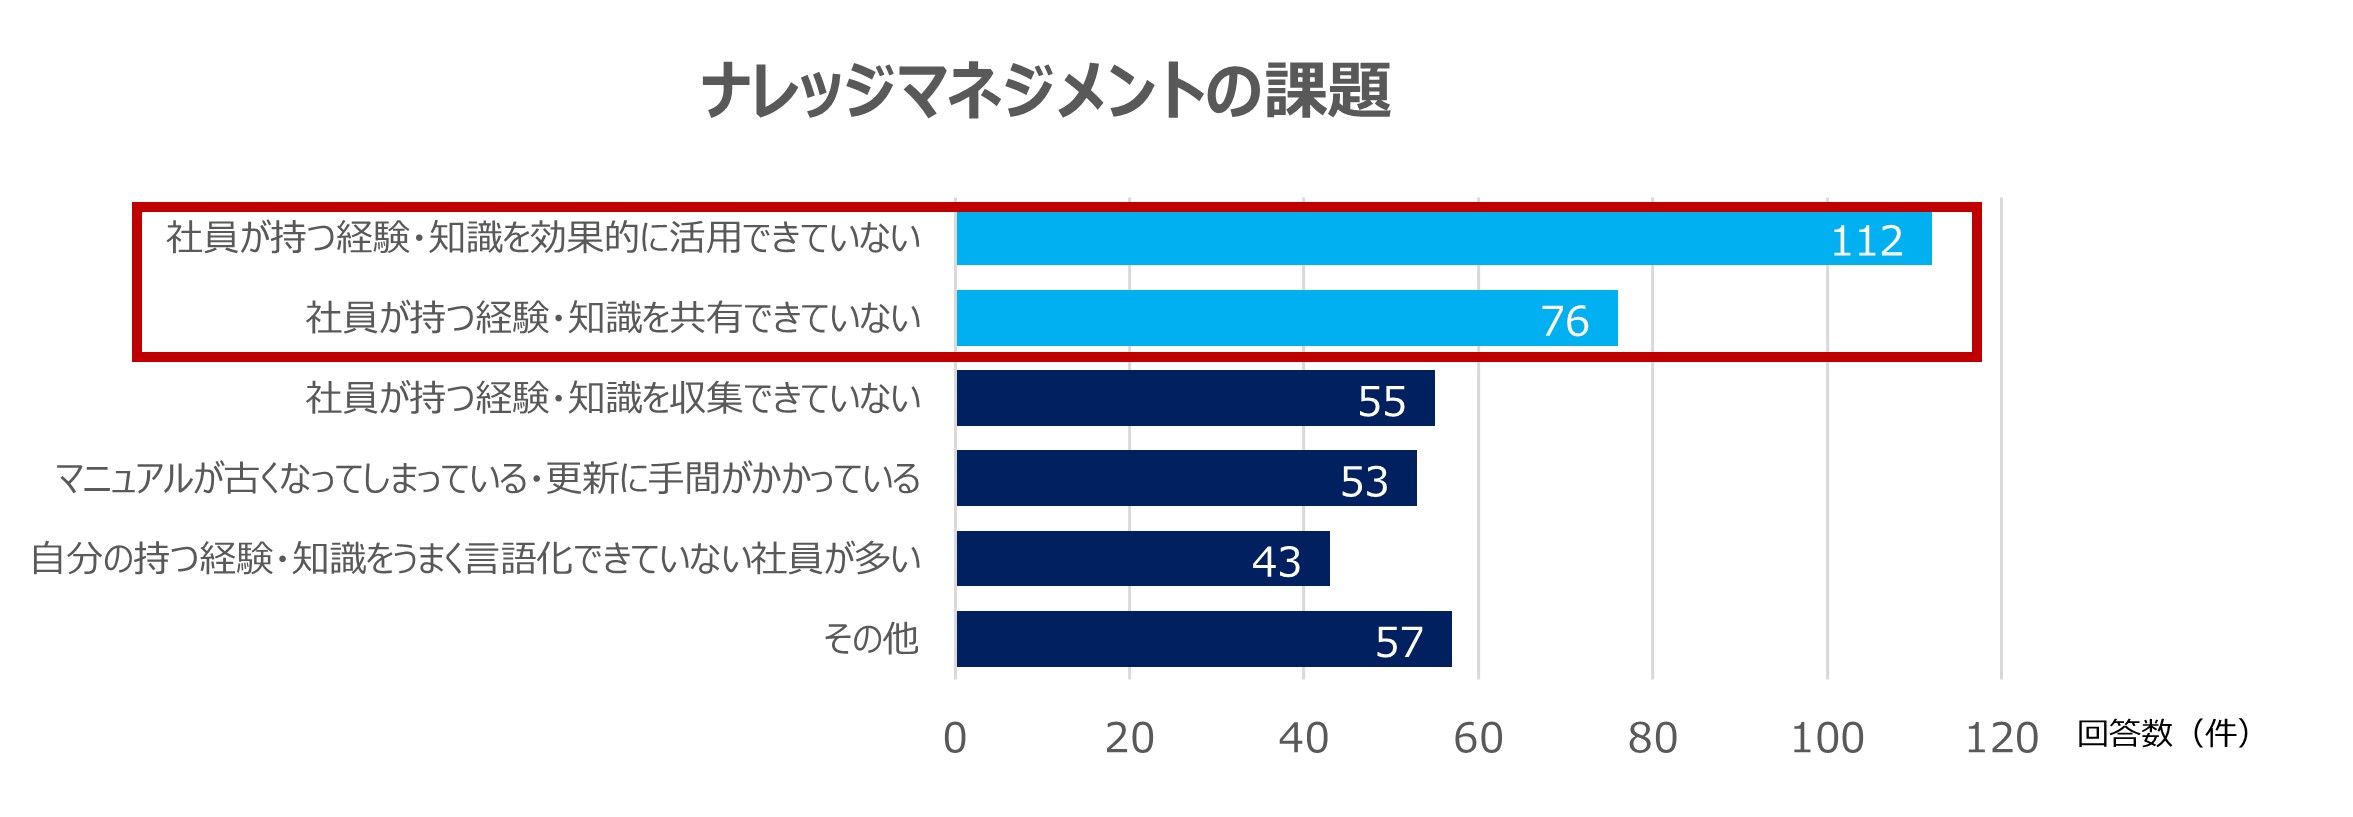 ※According to a survey conducted by TOPWELL Co., Ltd. on Japanese manufacturing companies